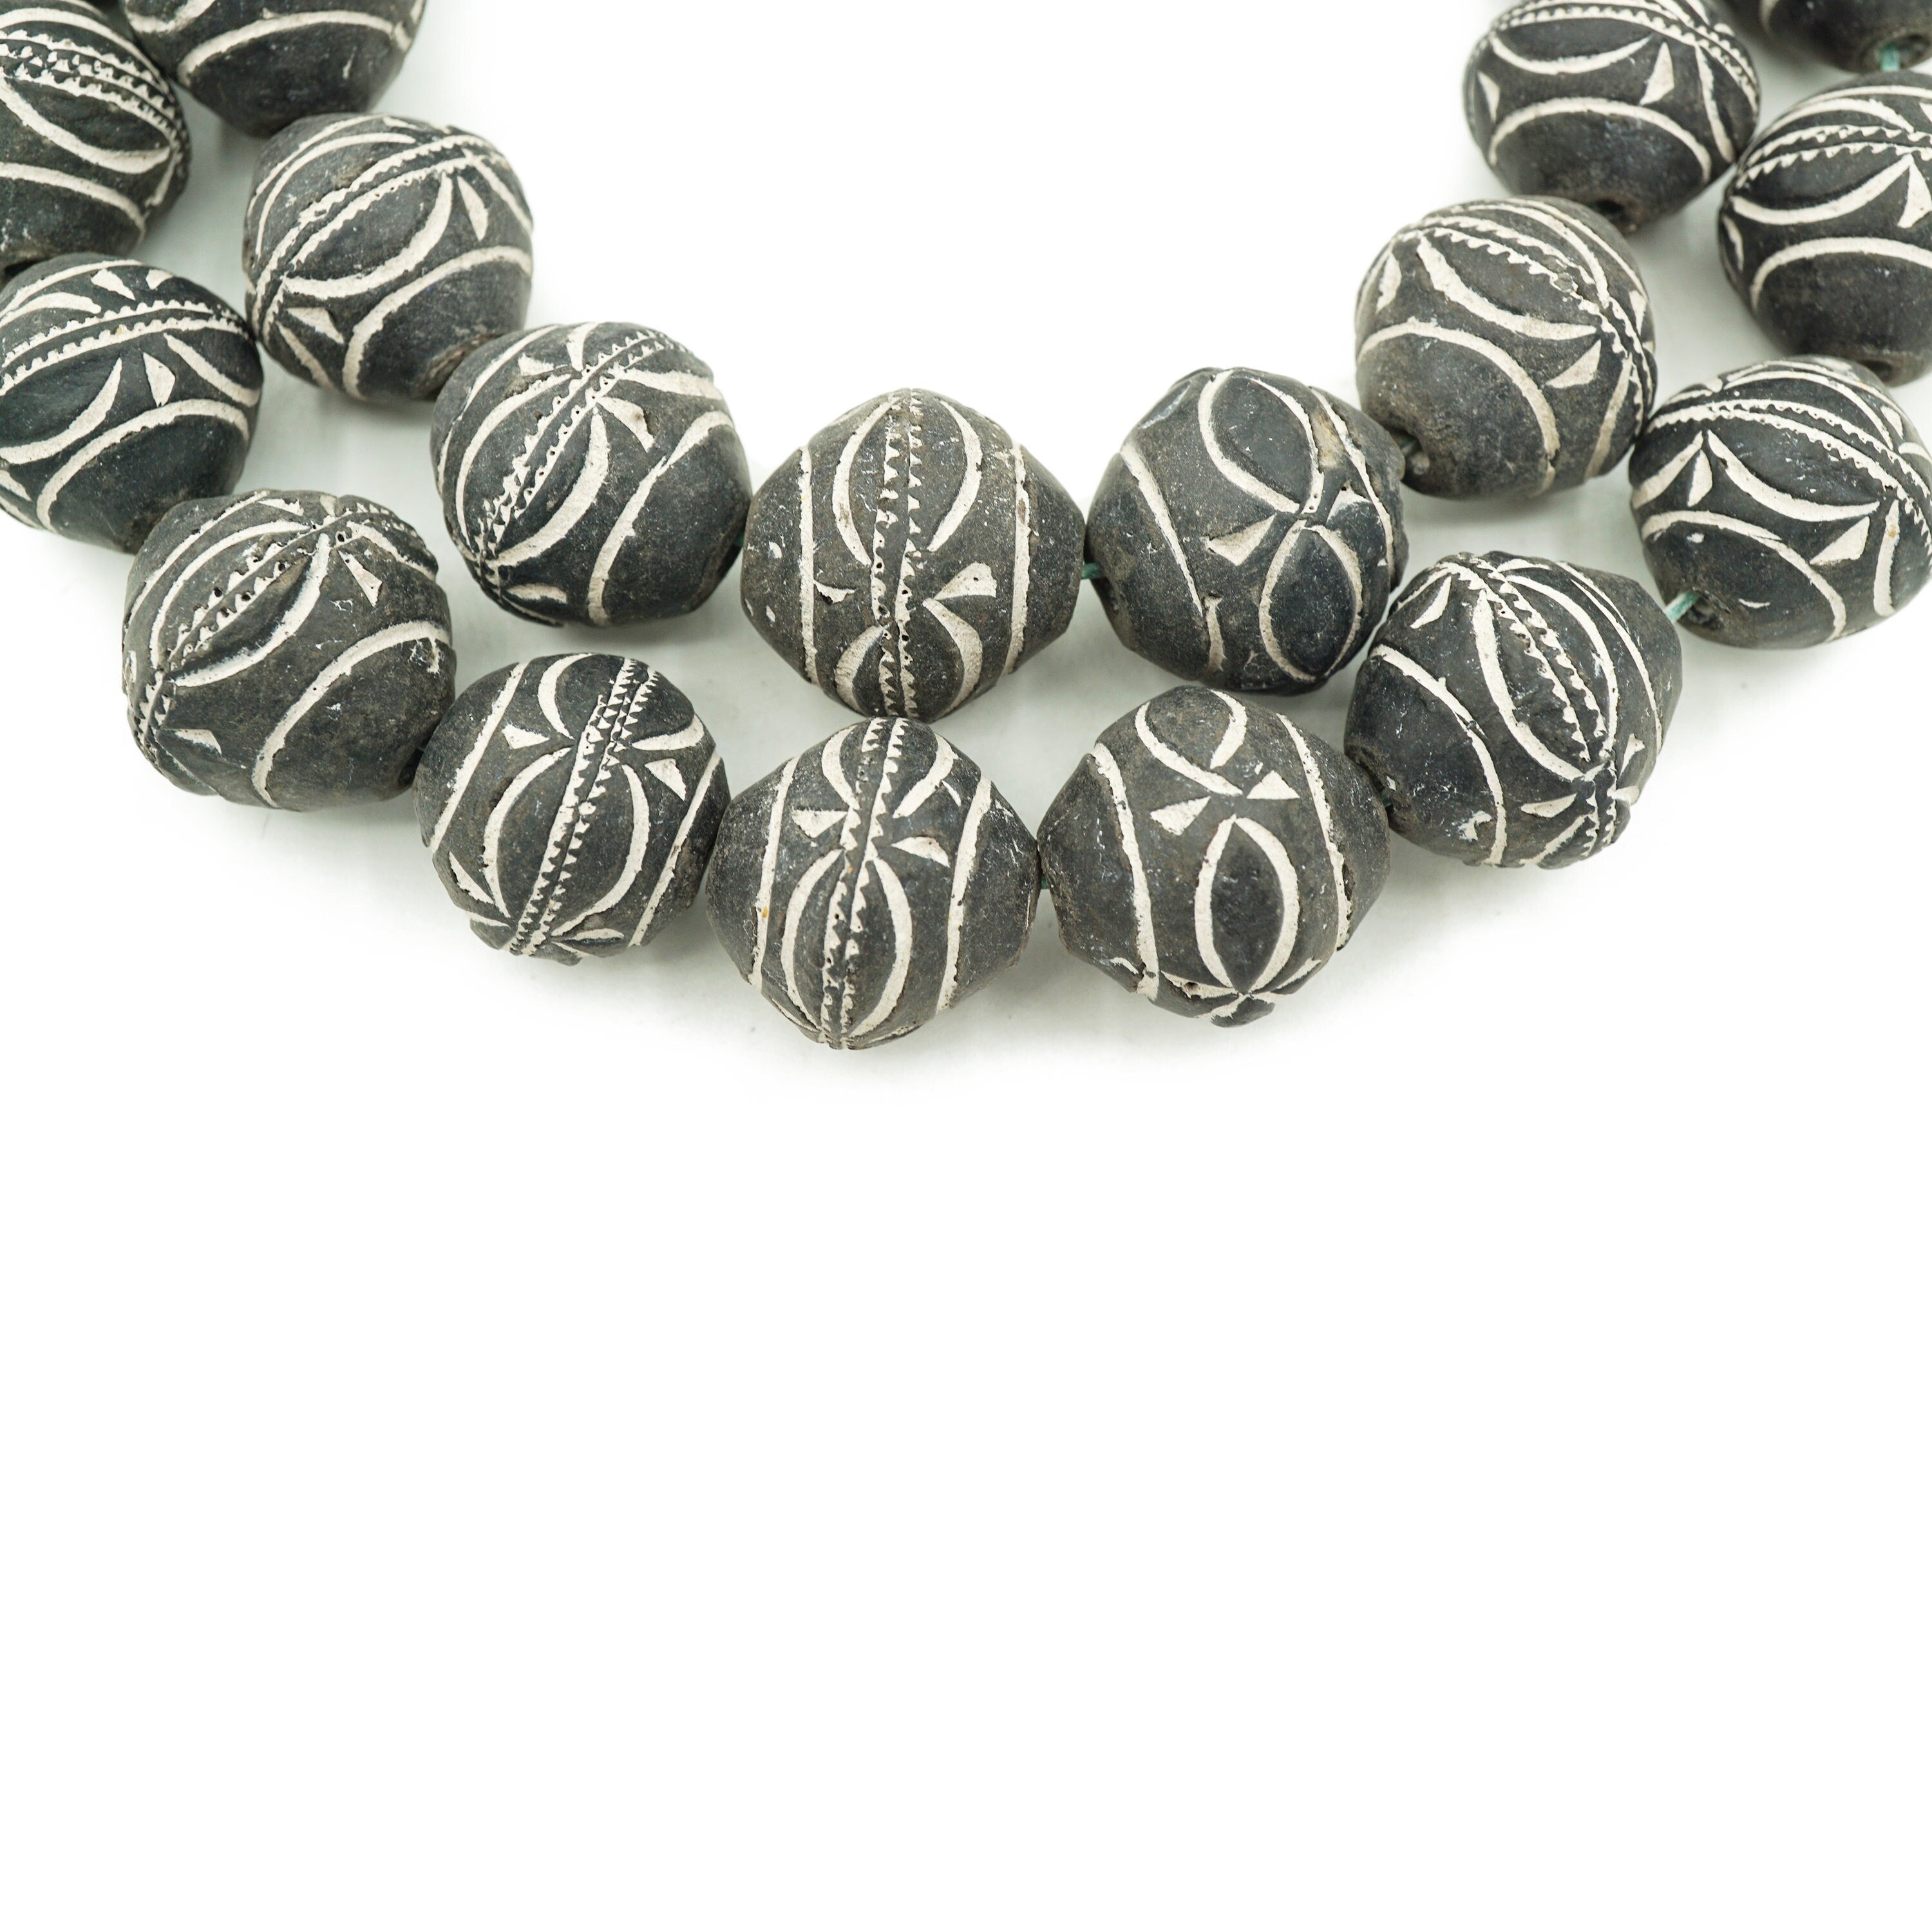 Vintage Ethnic African Tribal Clay Beads Black White 12 pcs